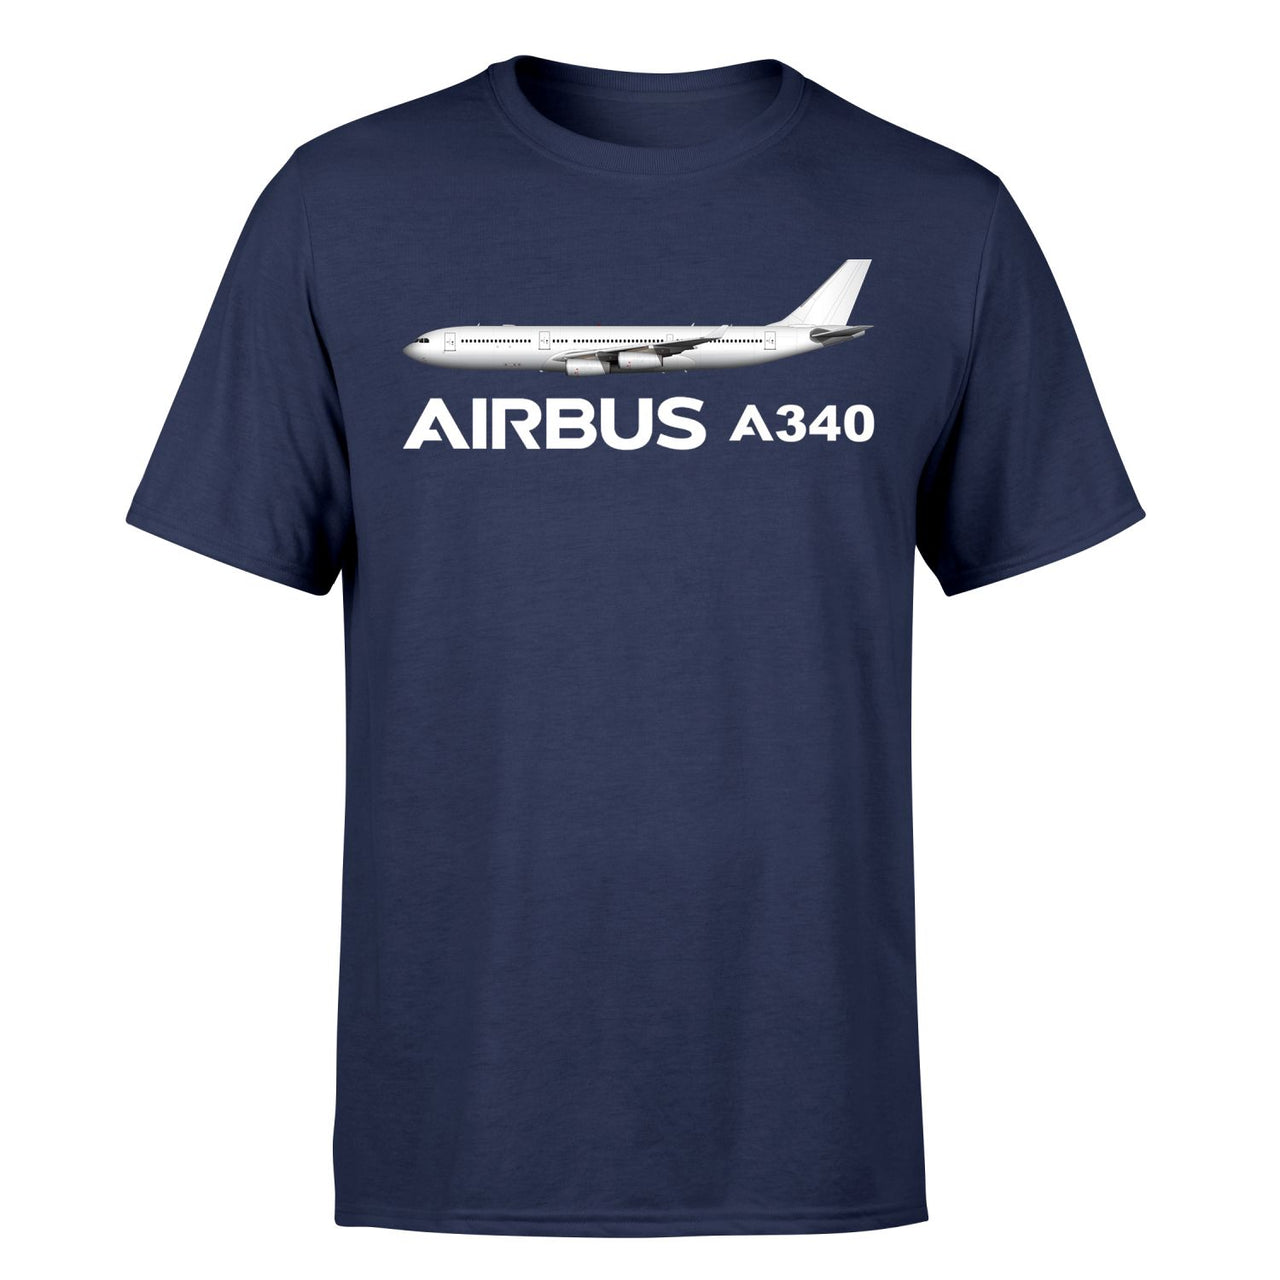 The Airbus A340 Designed T-Shirts